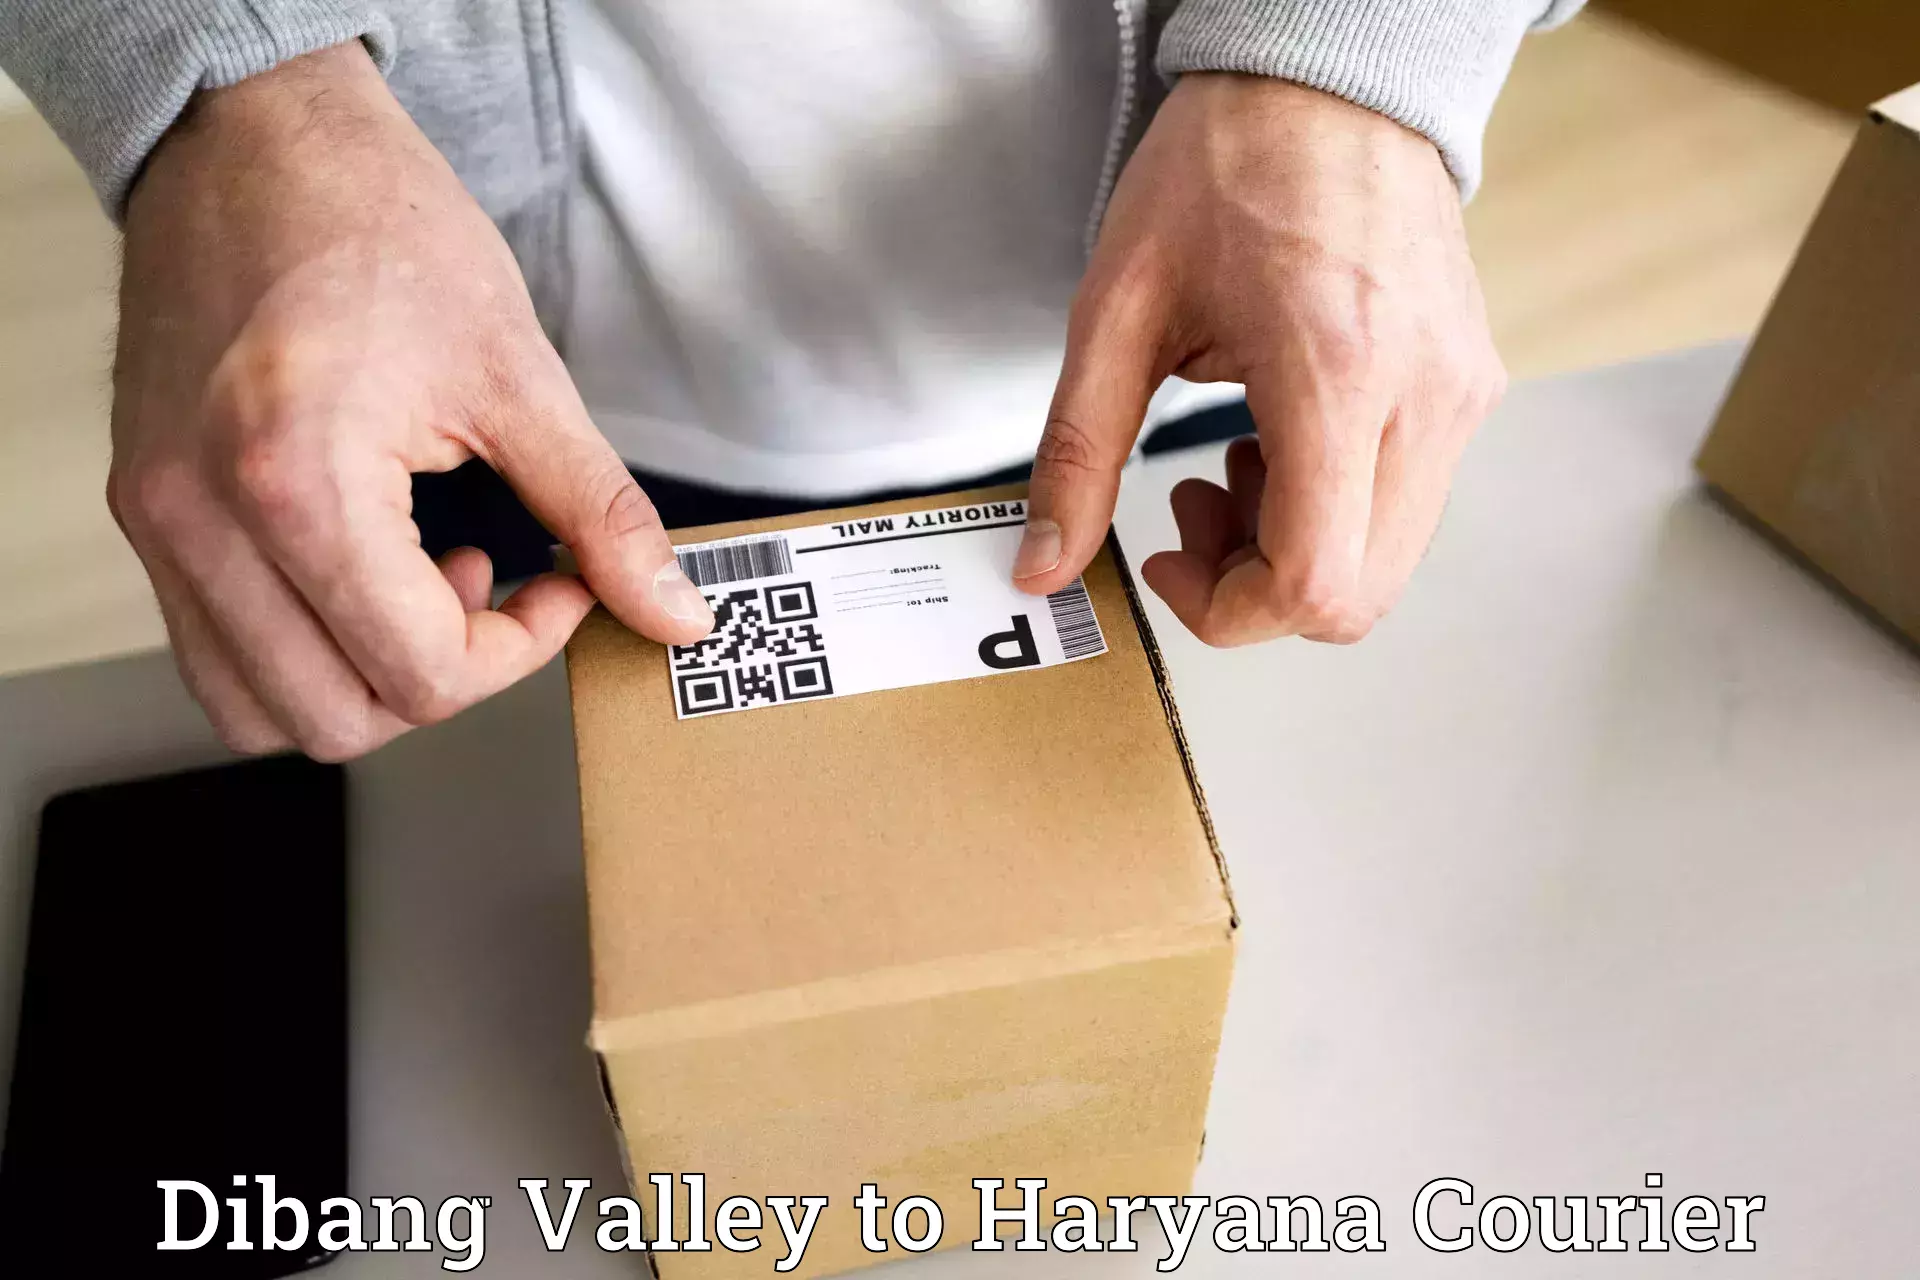 Advanced courier platforms Dibang Valley to NCR Haryana